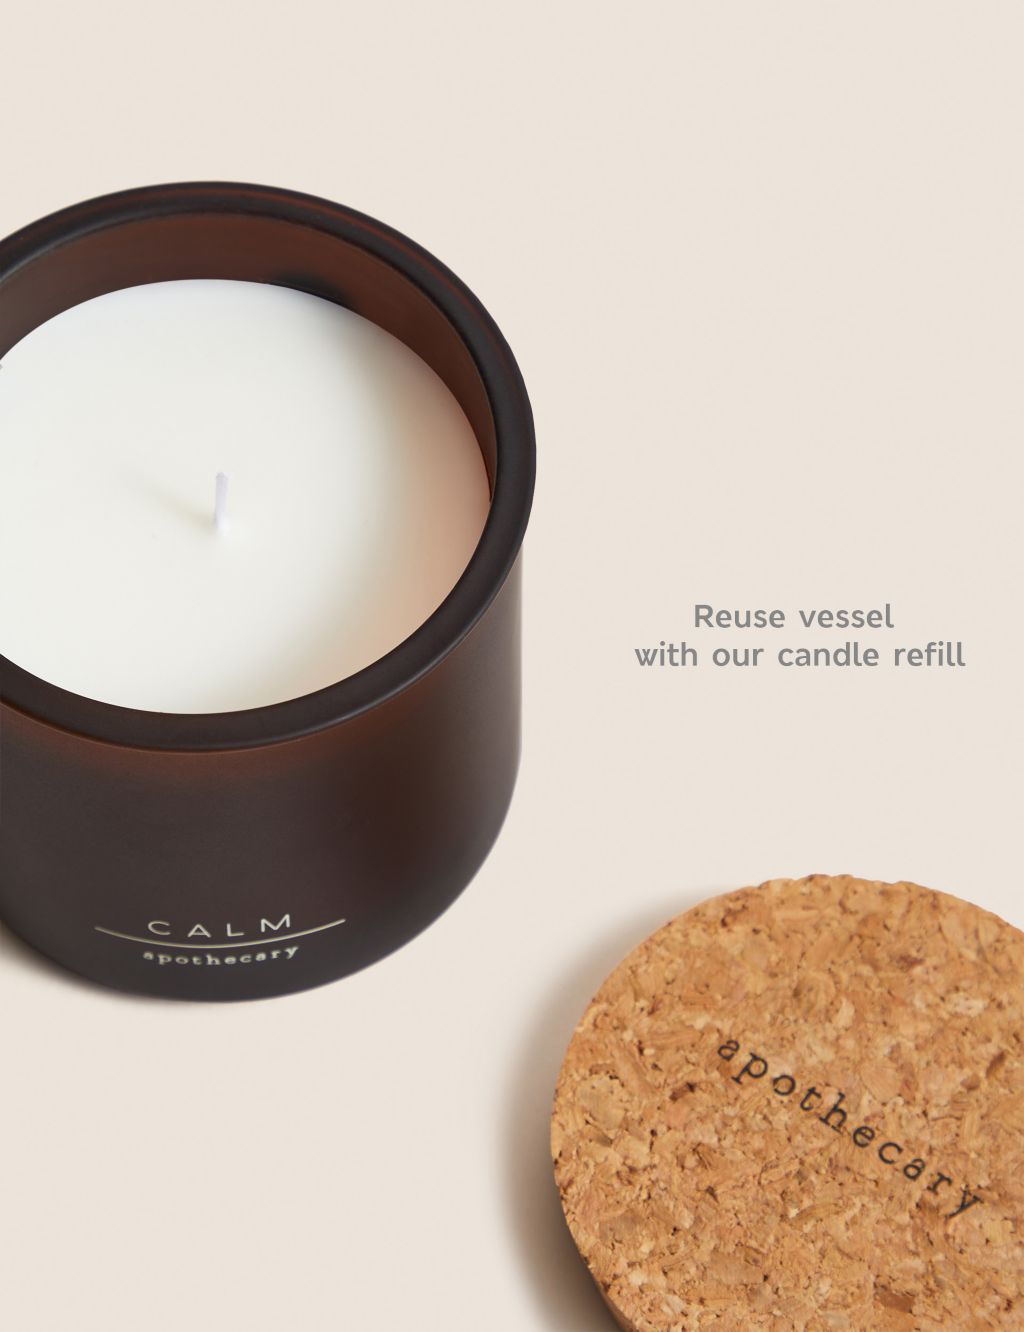 Calm Refillable Candle image 4